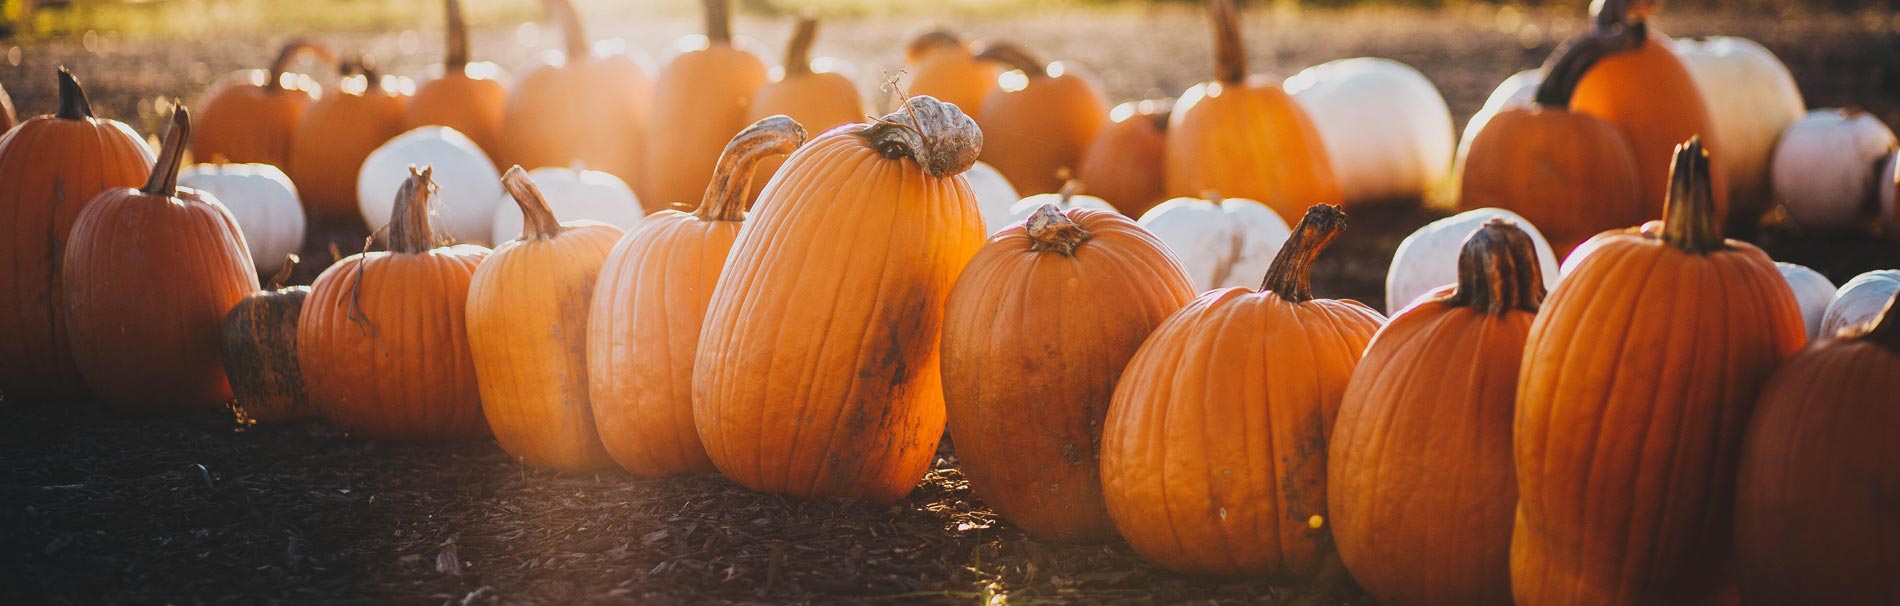 11 Things We Love About Fall - Senior Retirement